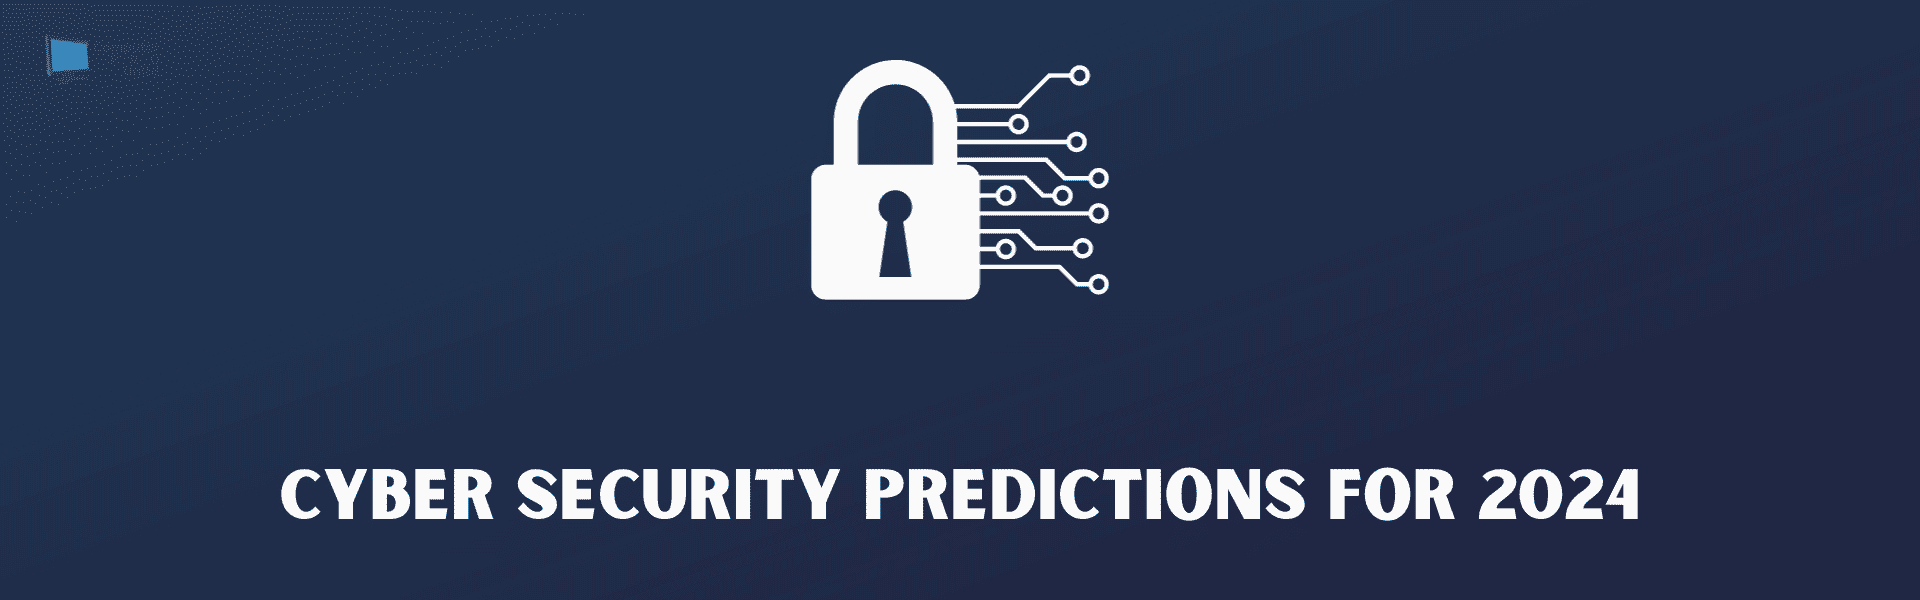 Cyber-Security-Predictions-2024-Banner